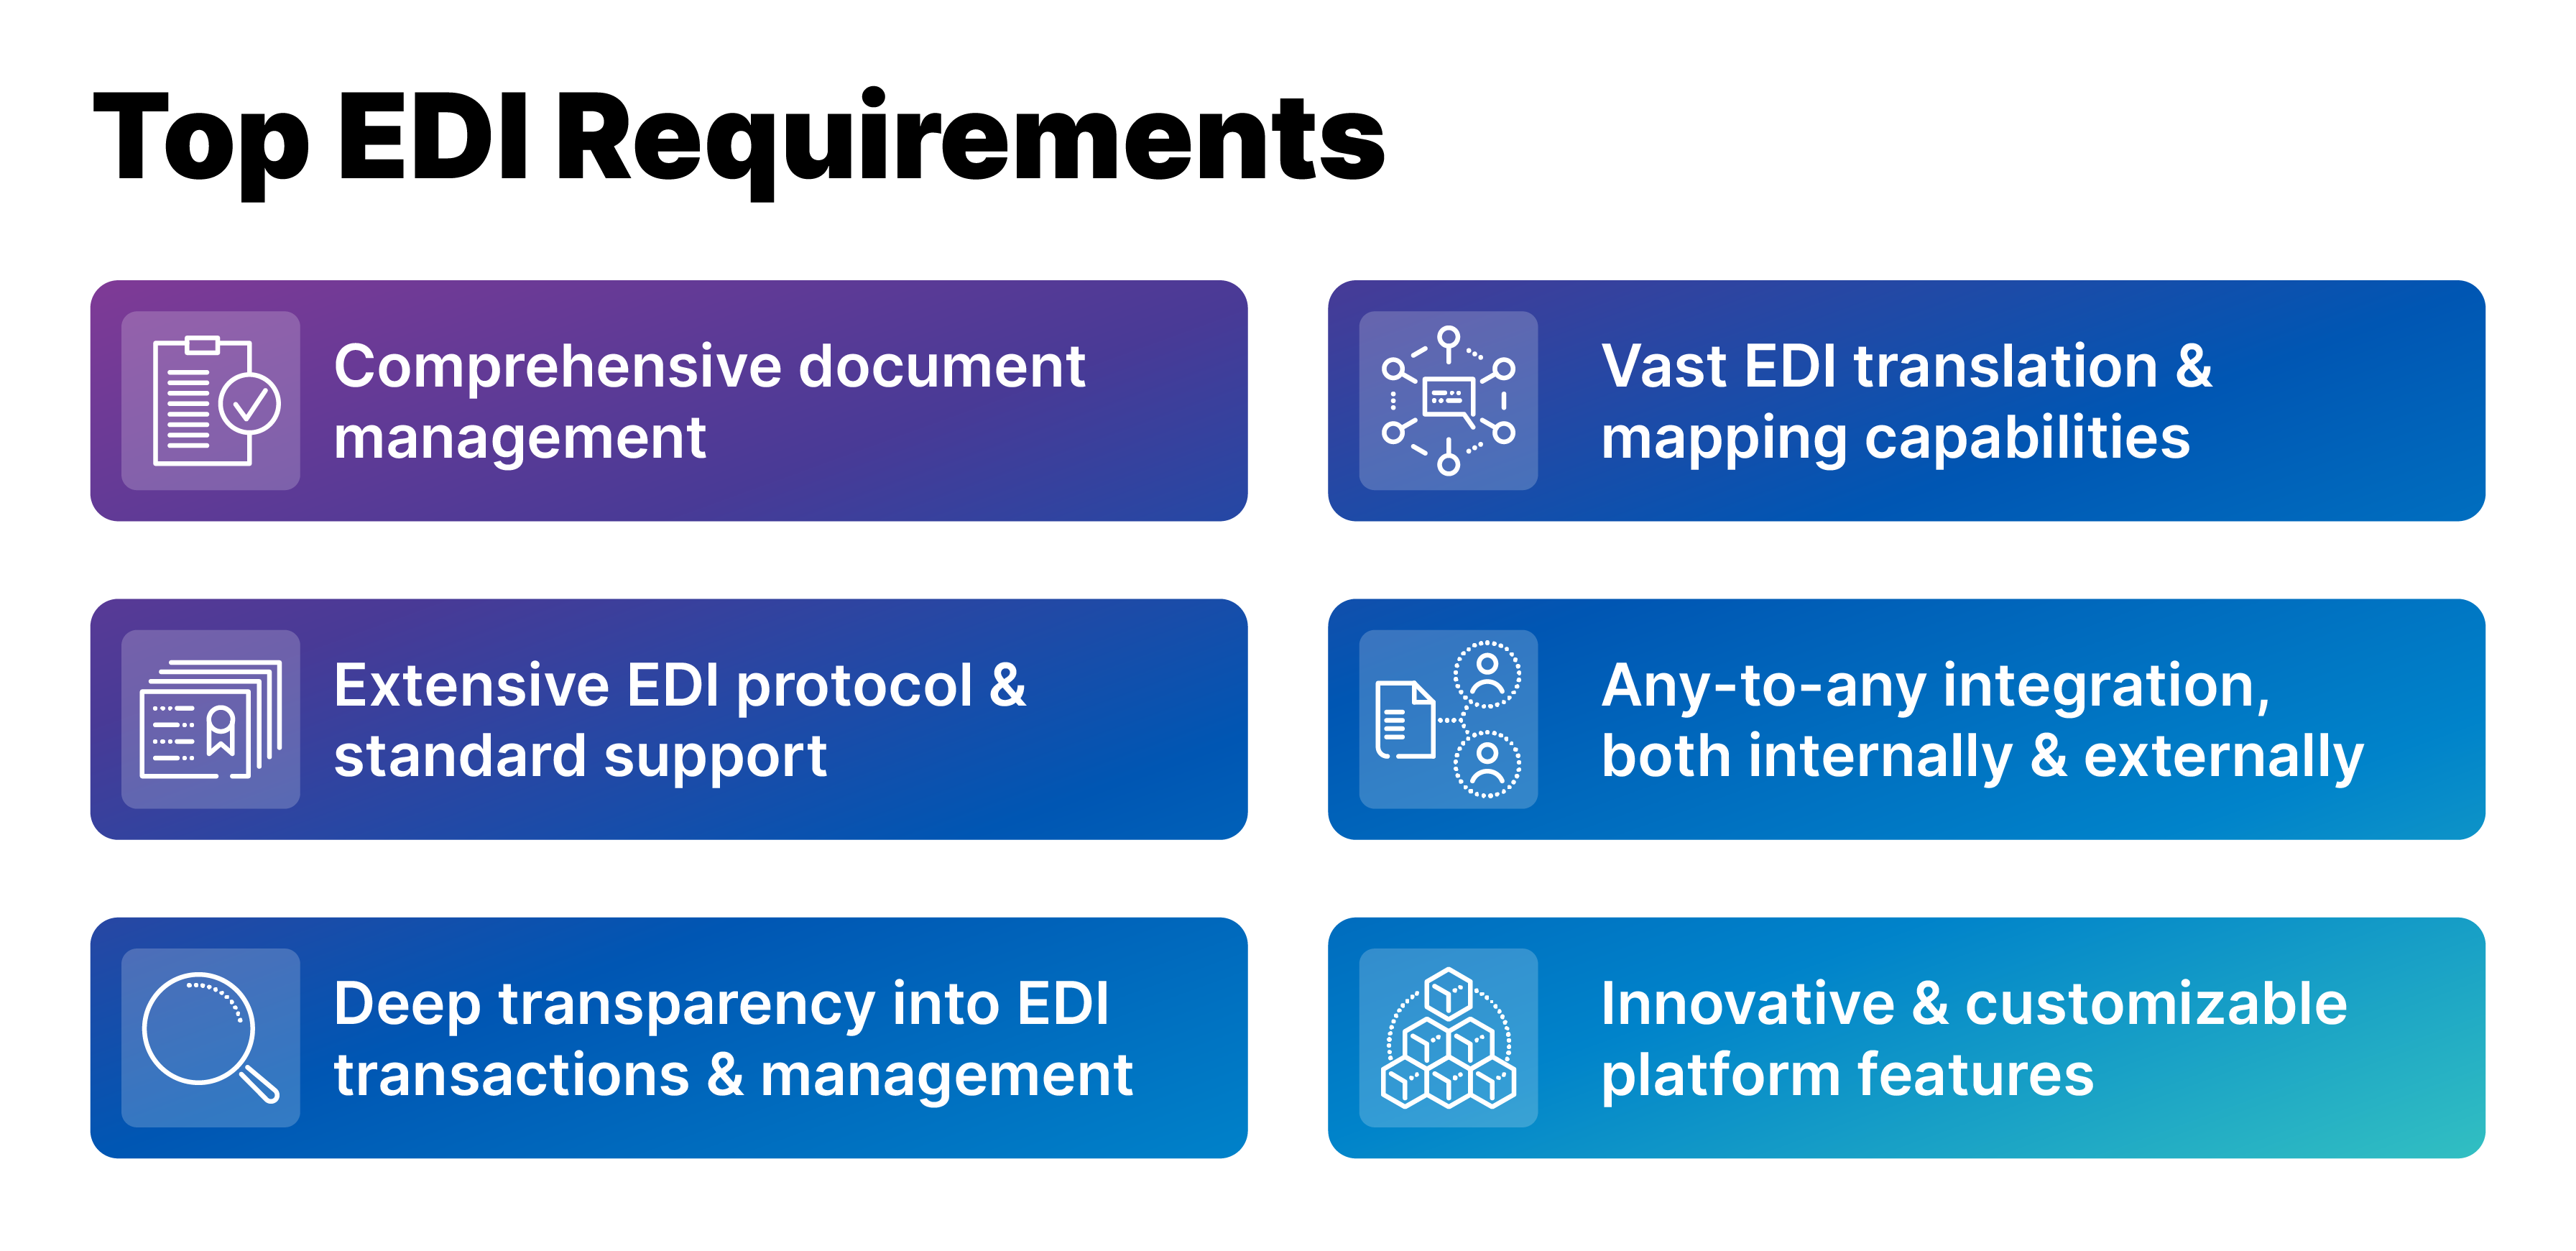 A list of top EDI requirements